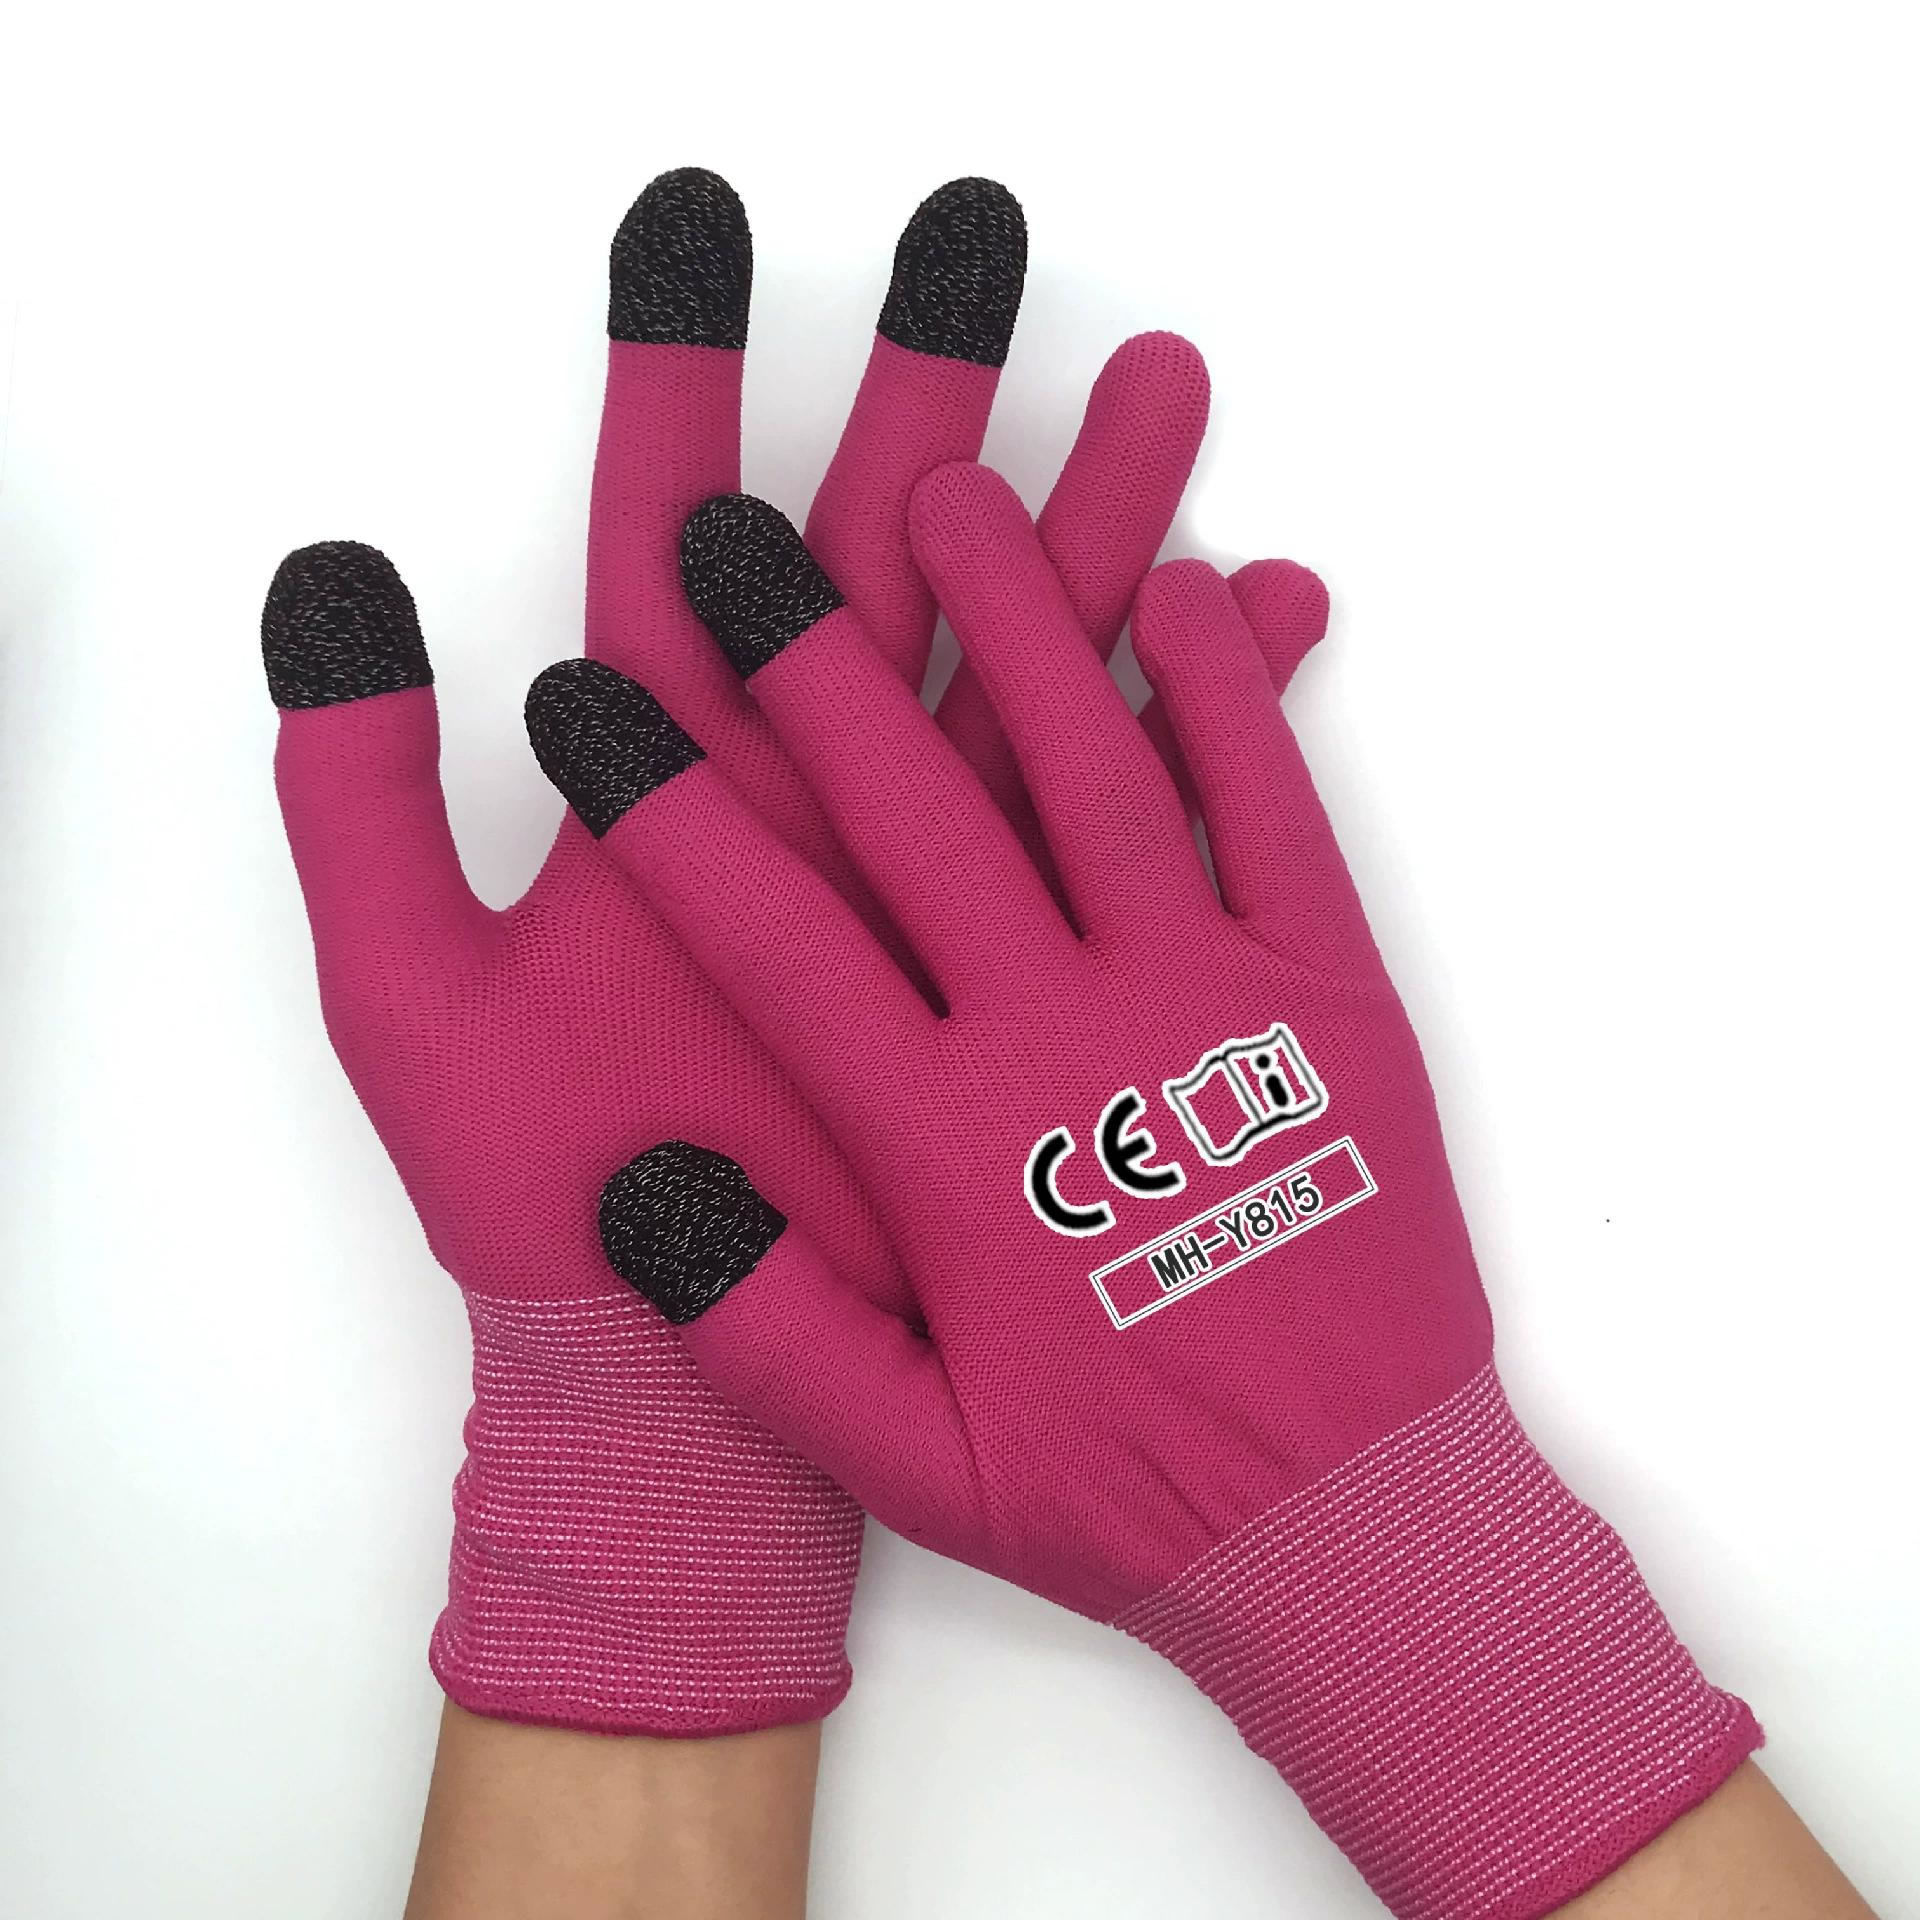 Warm game gloves (rose red three finger touch screen)